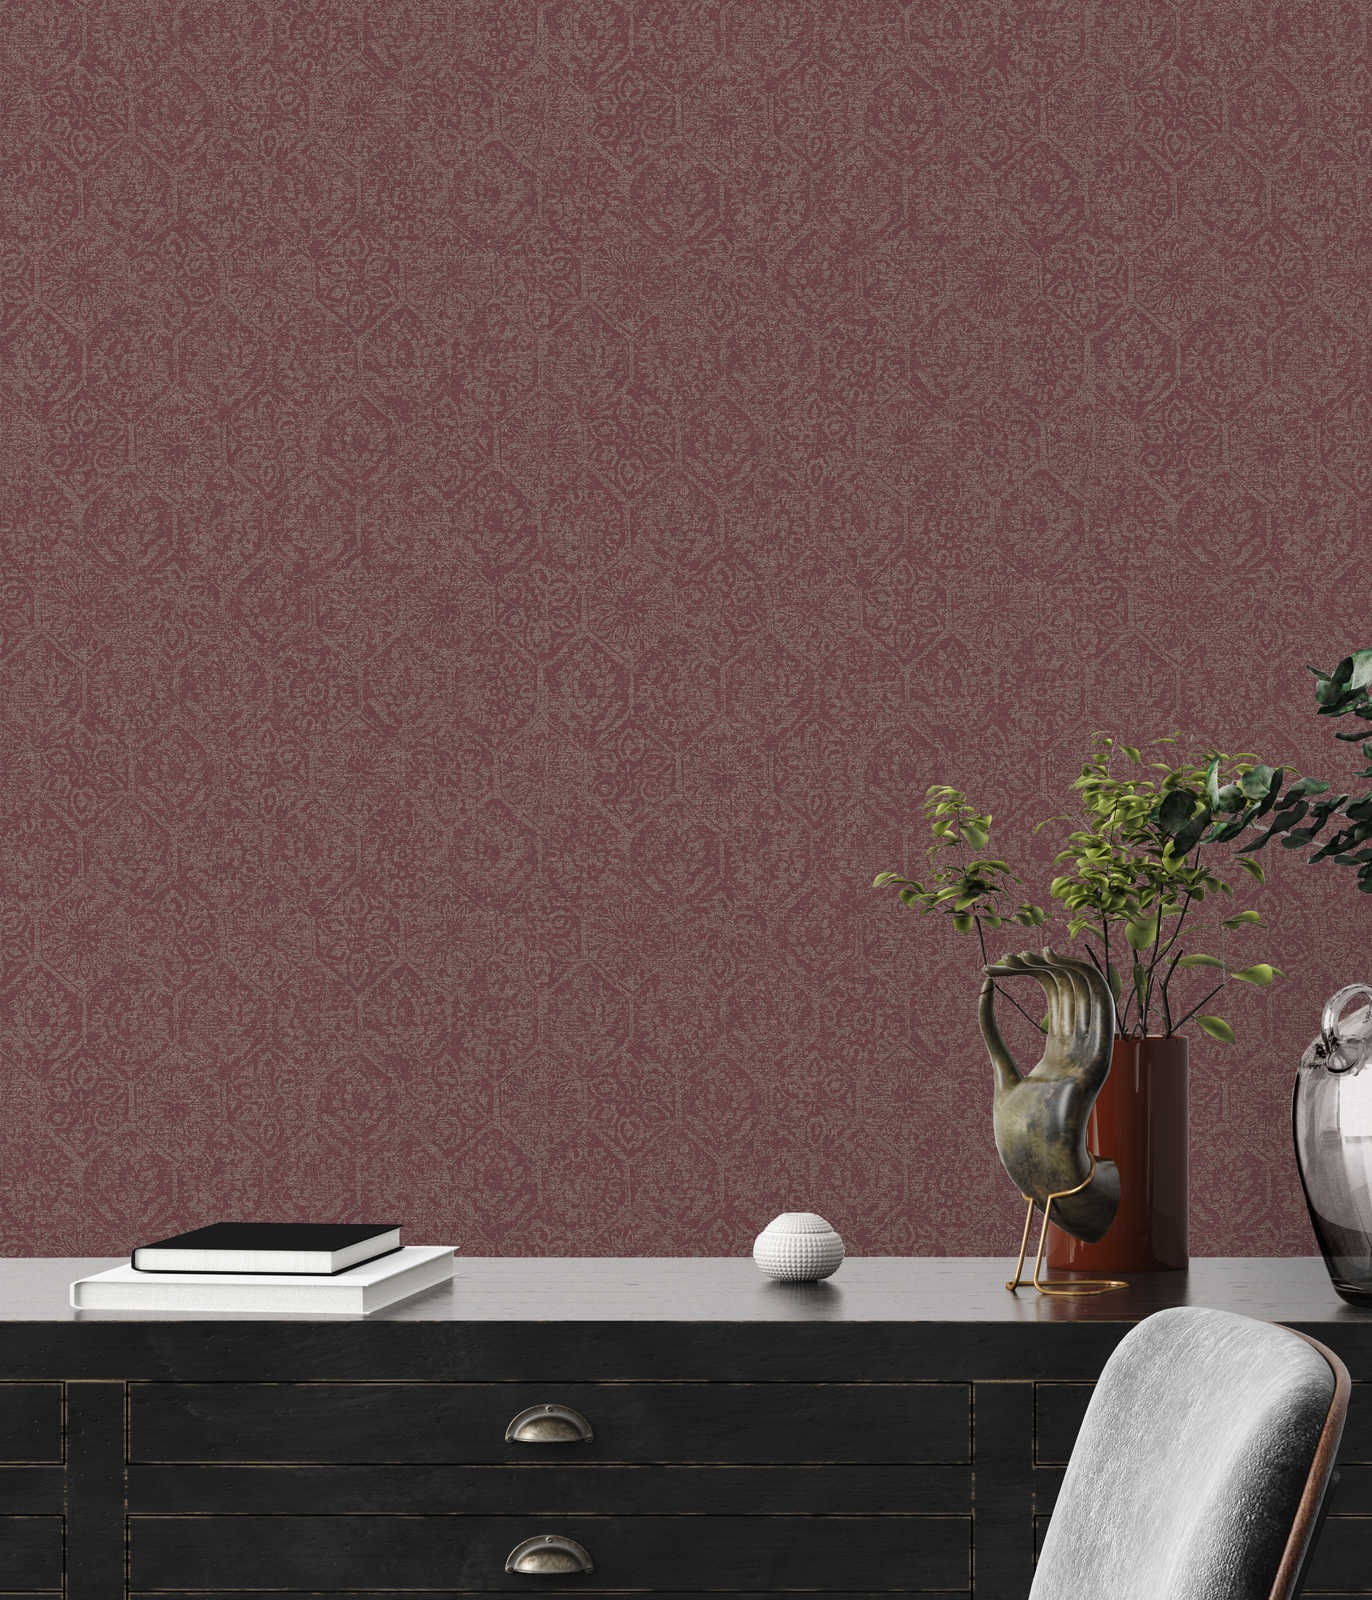             Wallpaper gold pattern in used look with linen look - metallic, red
        